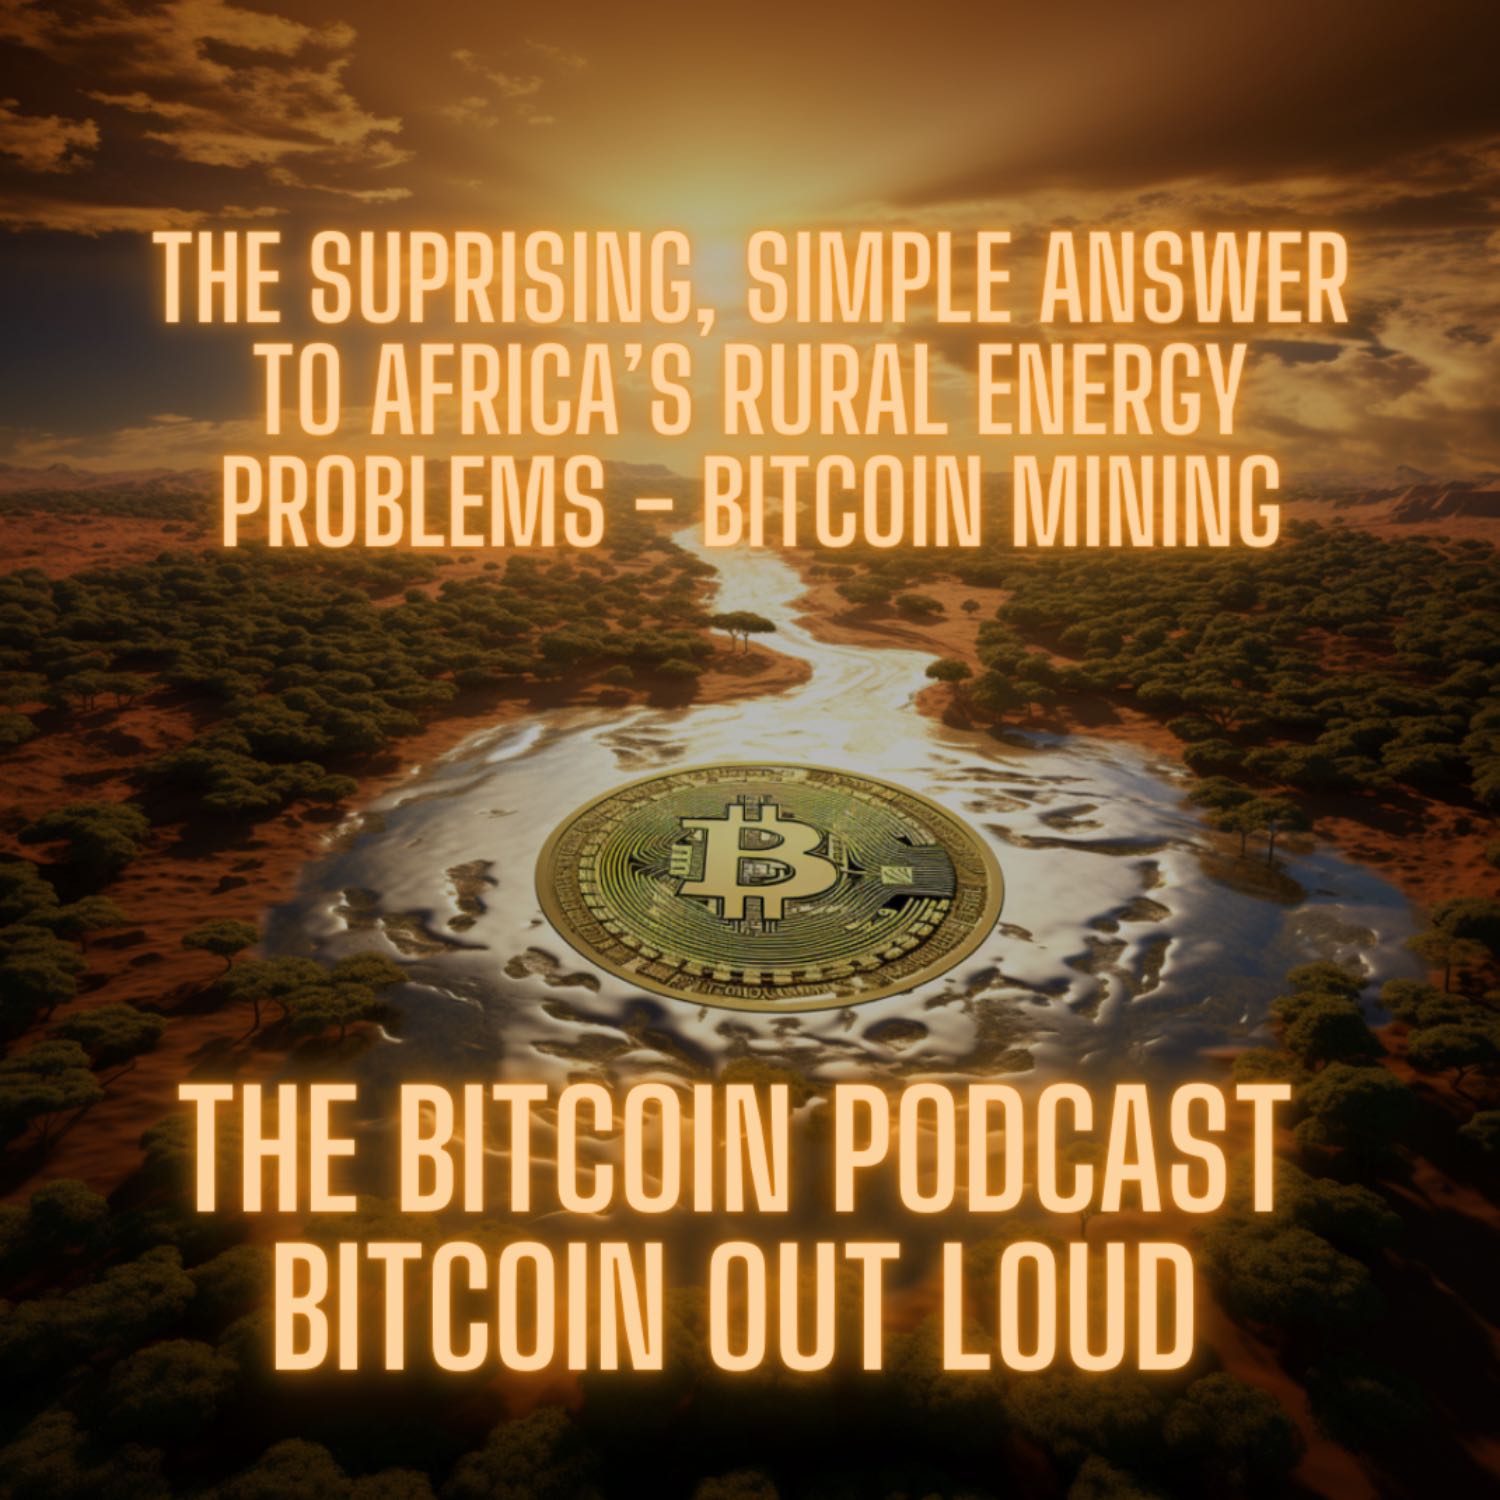 The surprising, simple answer to Africa’s rural energy problems – Bitcoin mining (Bitcoin Out Loud)